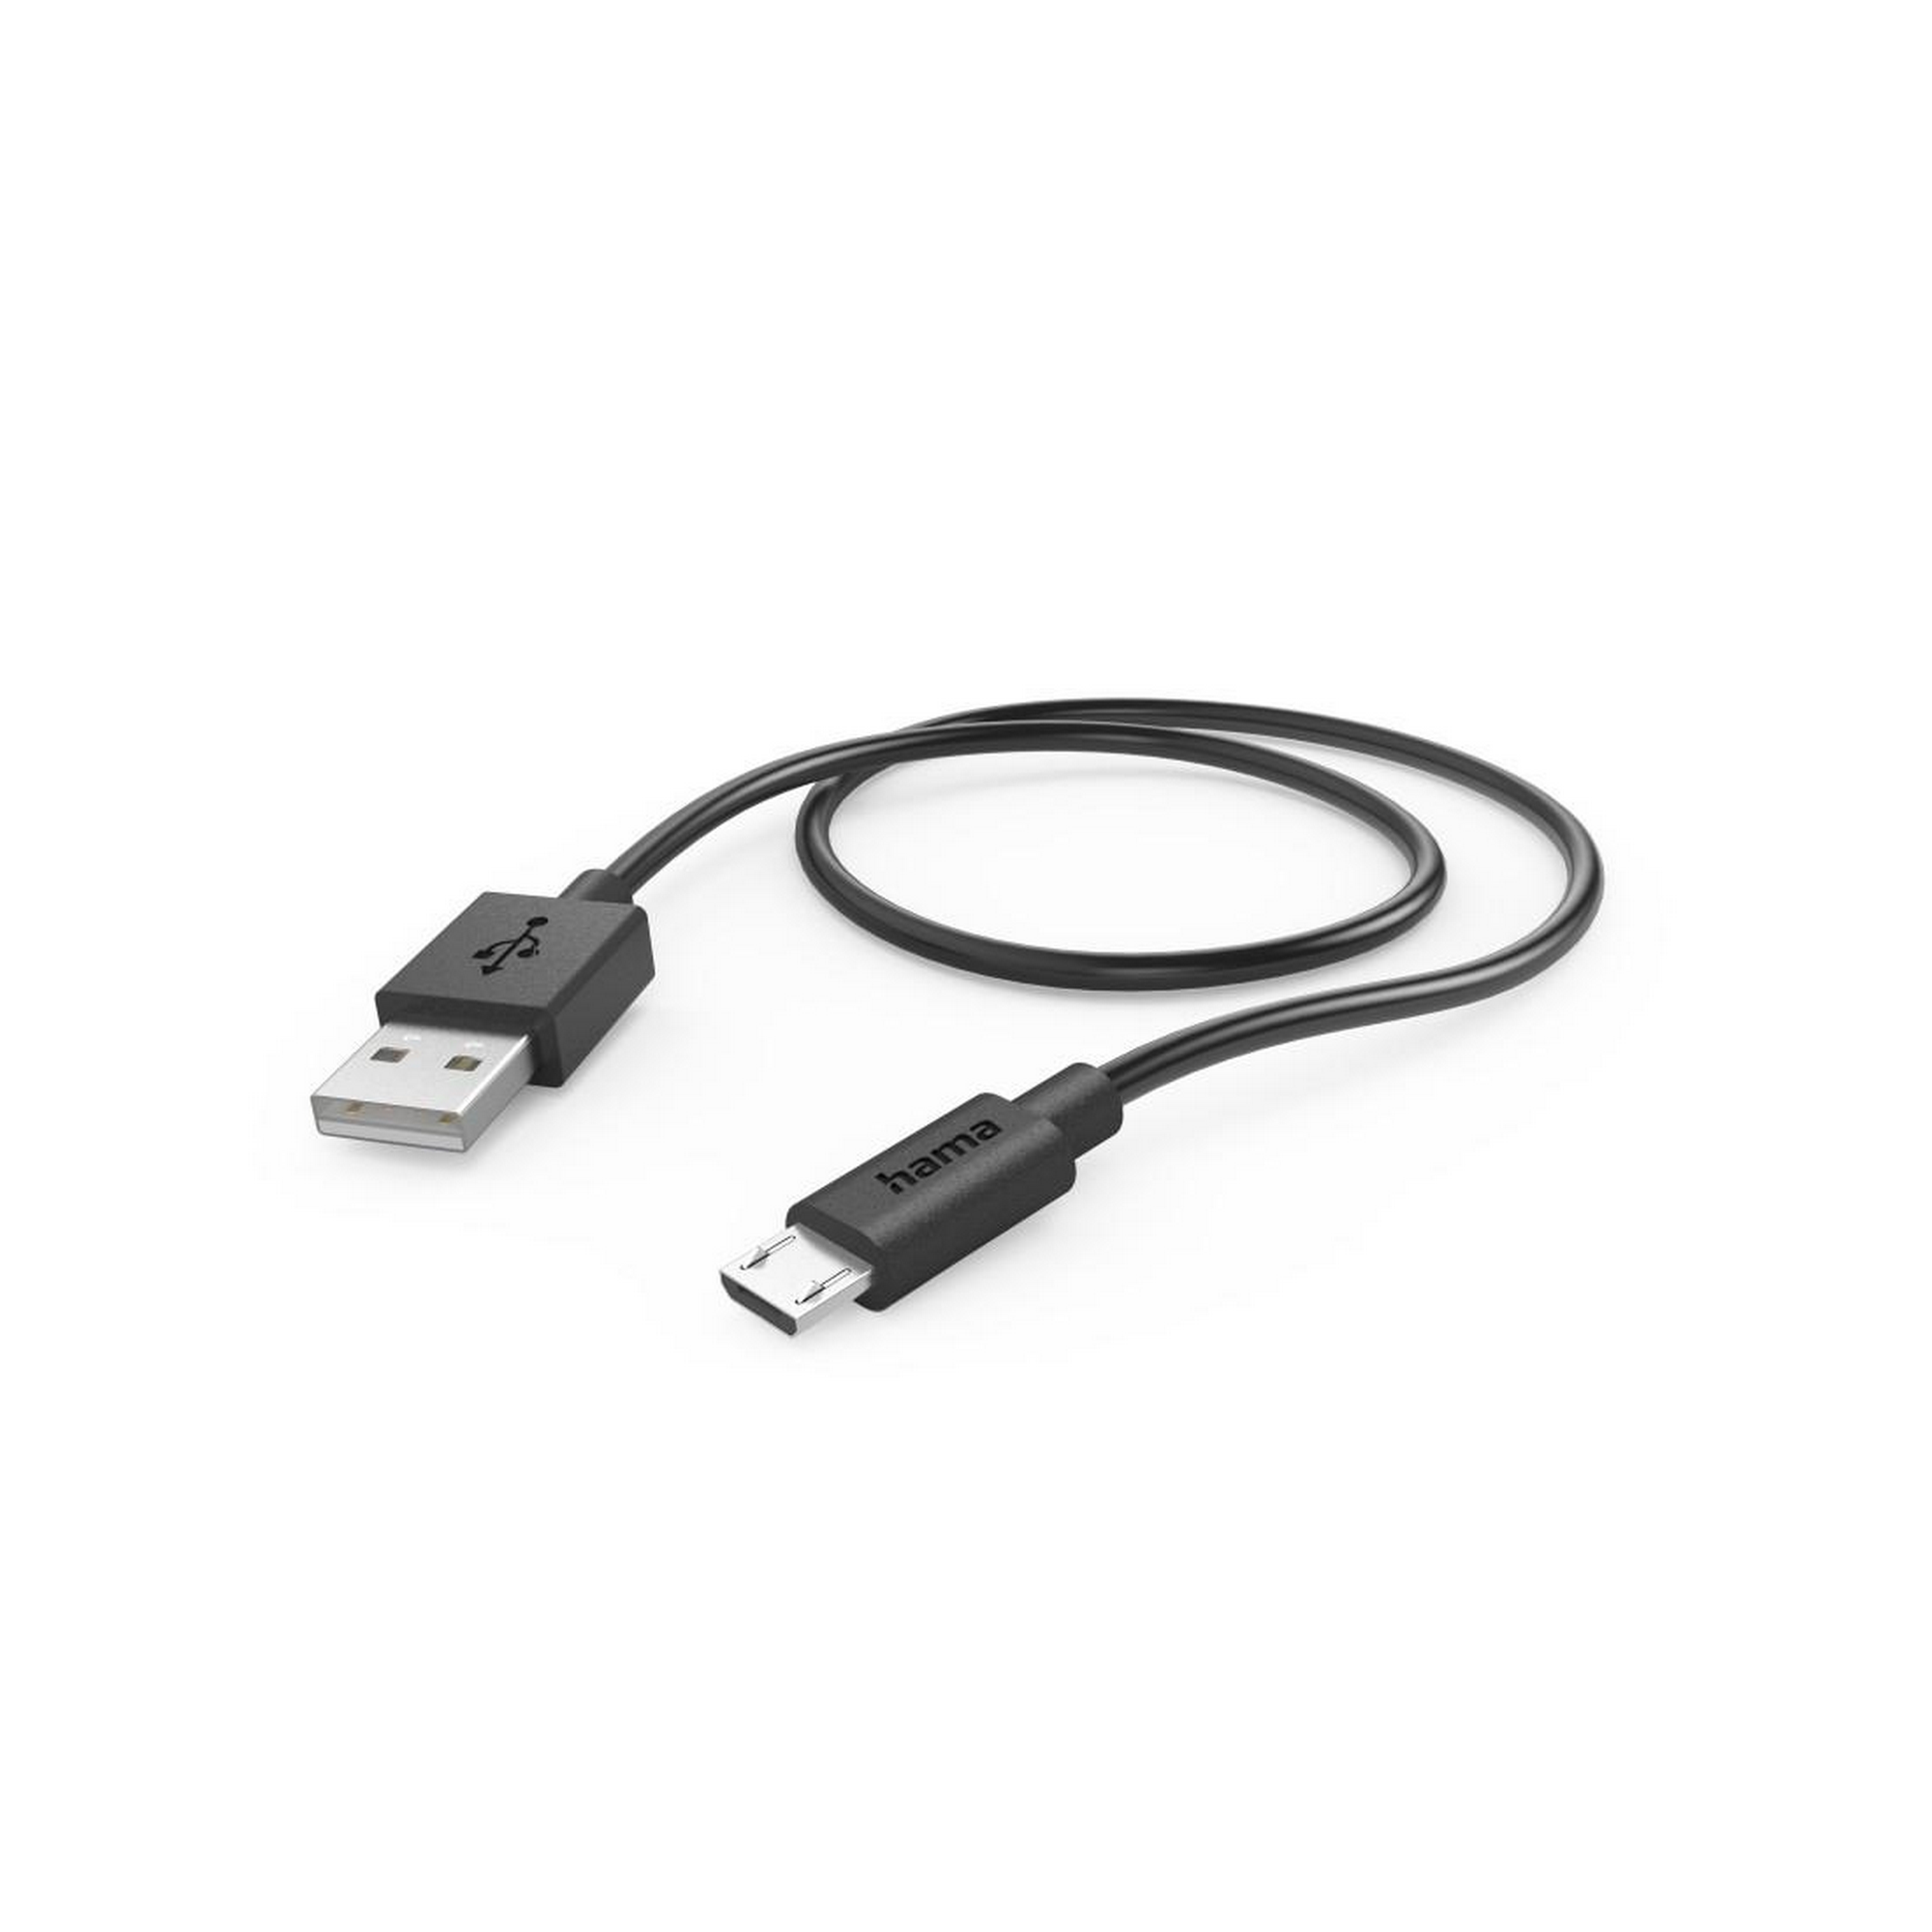 Lade-/Datenkabel schwarz USB-A mit Micro-USB 0,75 m + product picture